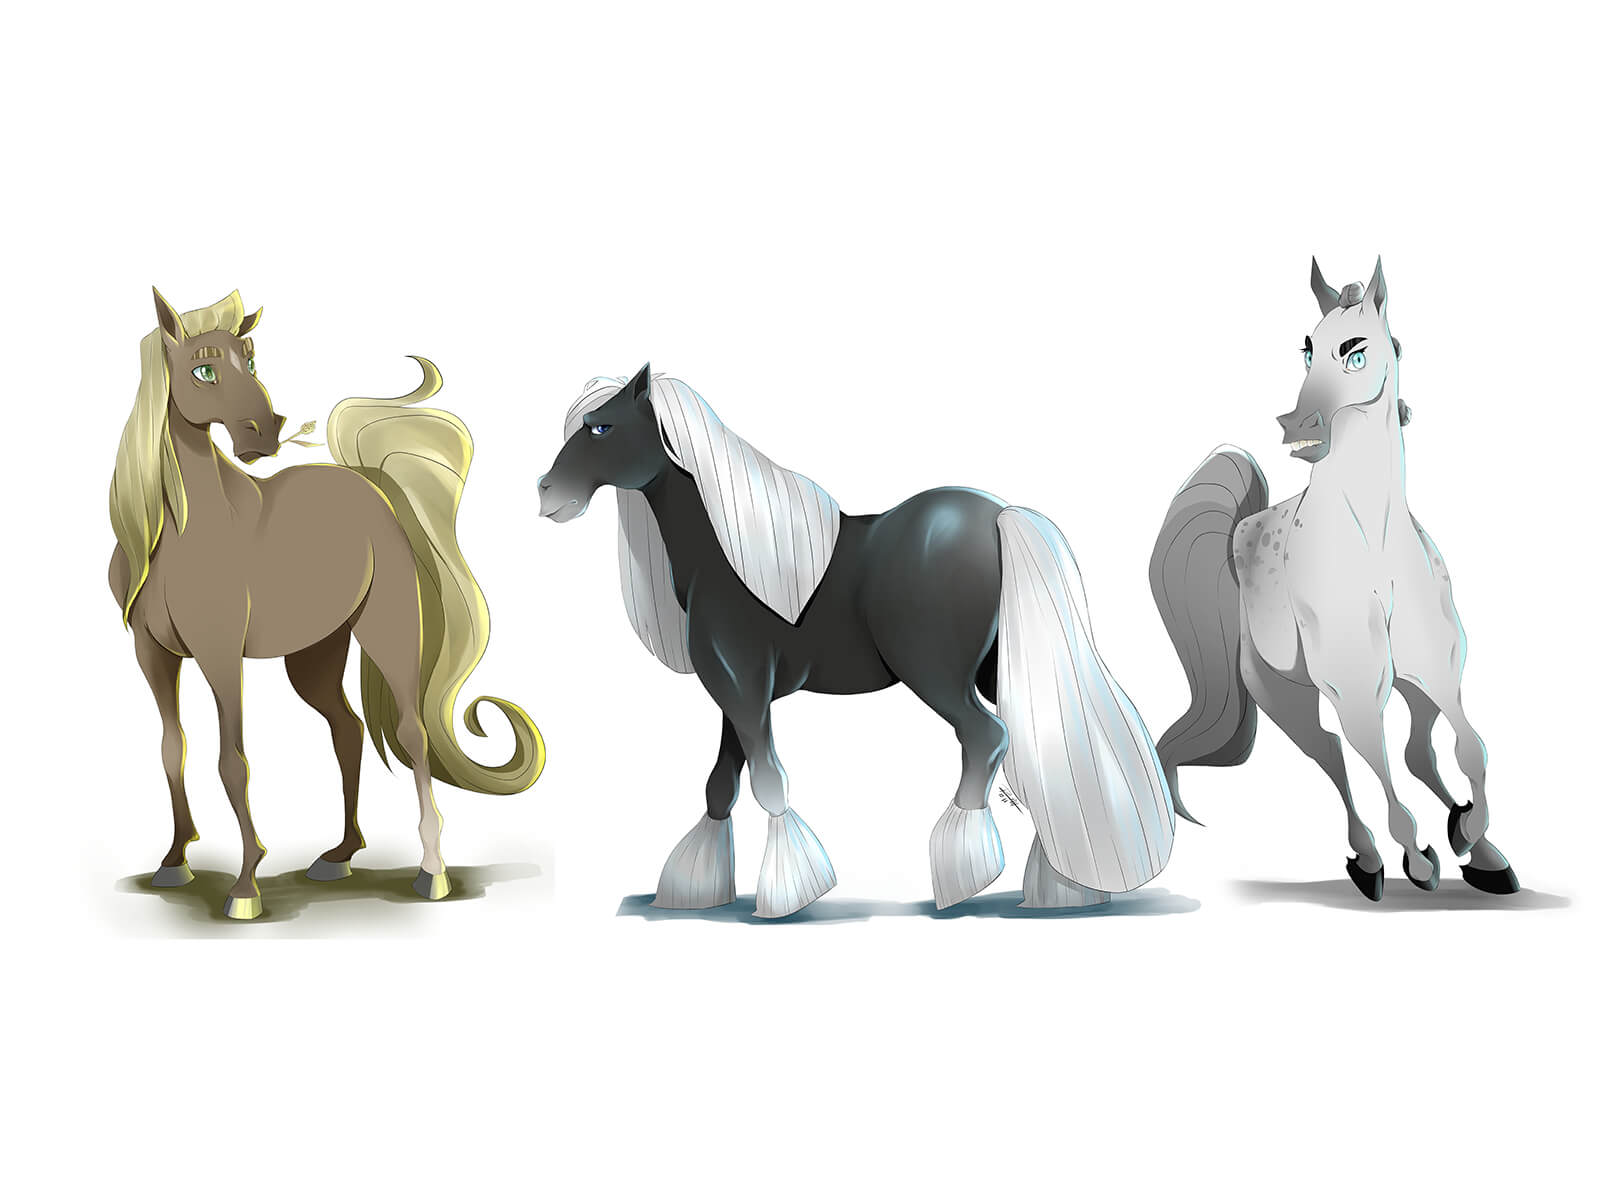 Digital painting of a brown, black, and white horse in cartoon stylization seen from various angles.